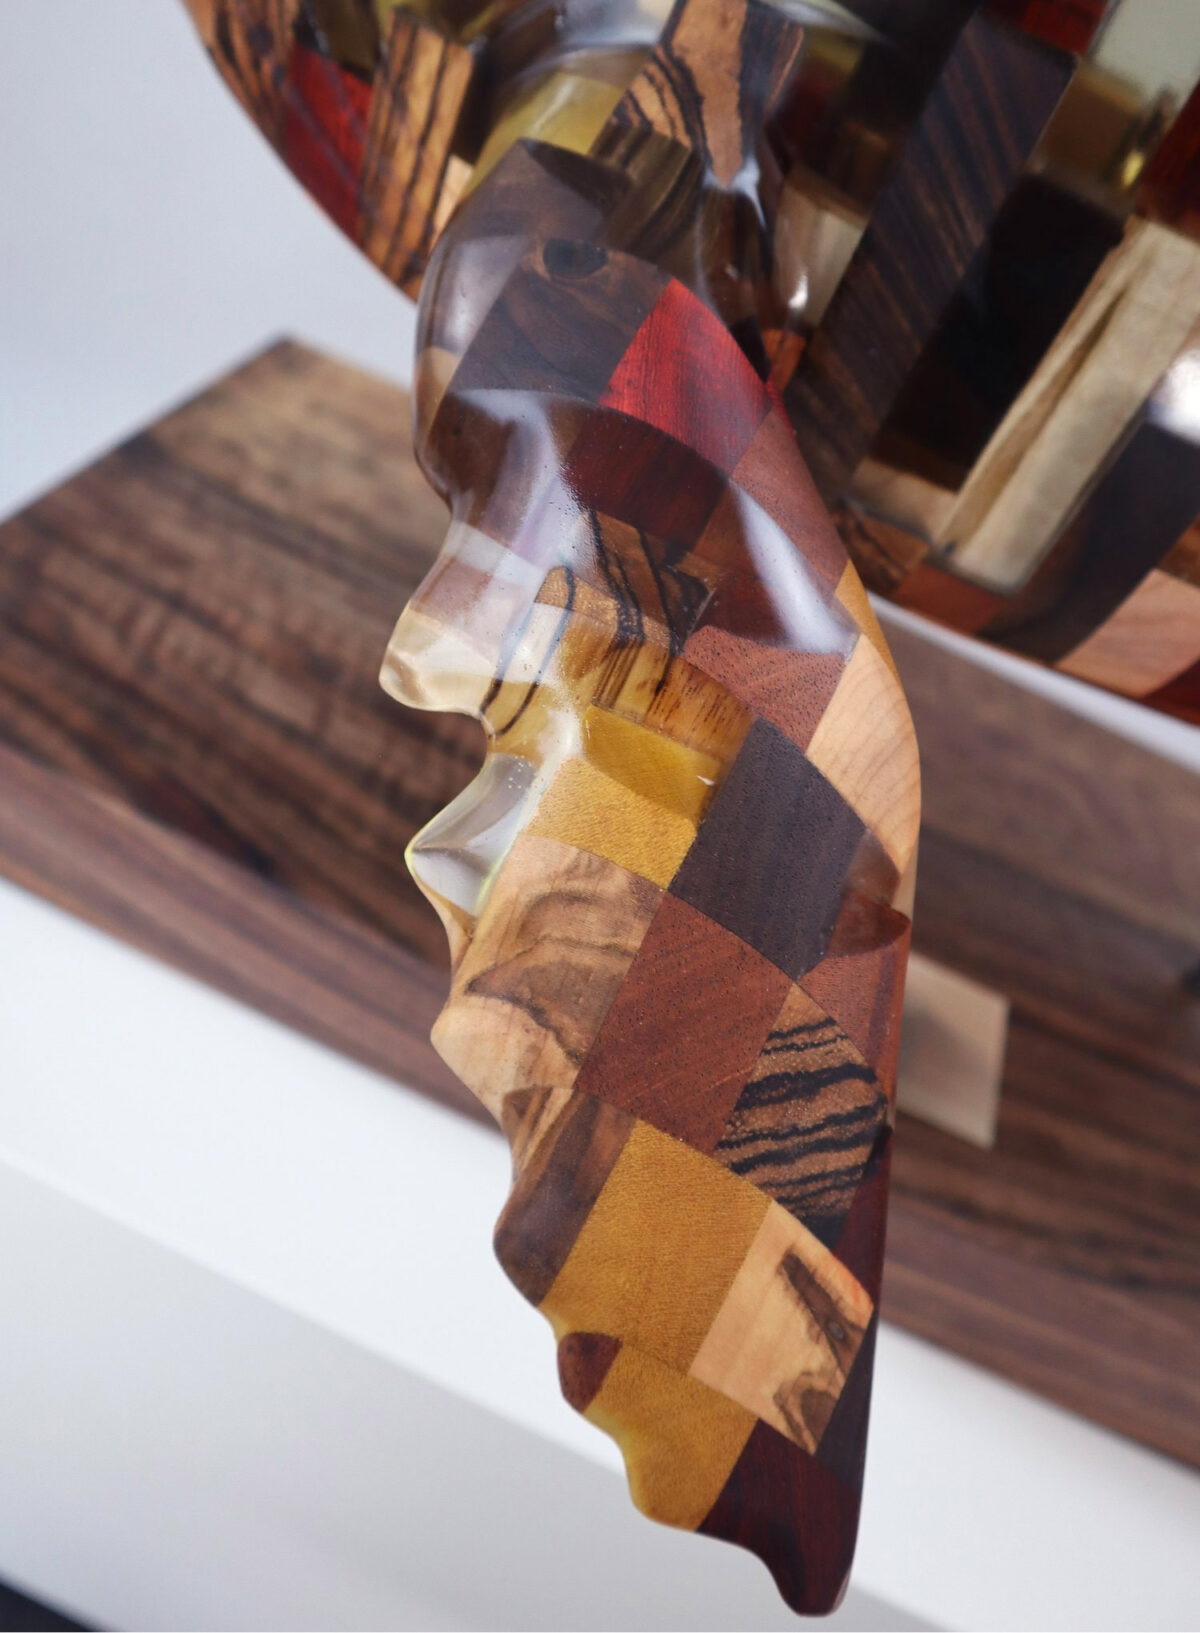 Superb Wood And Resin Sculptures By Blake Mcfarland (10)